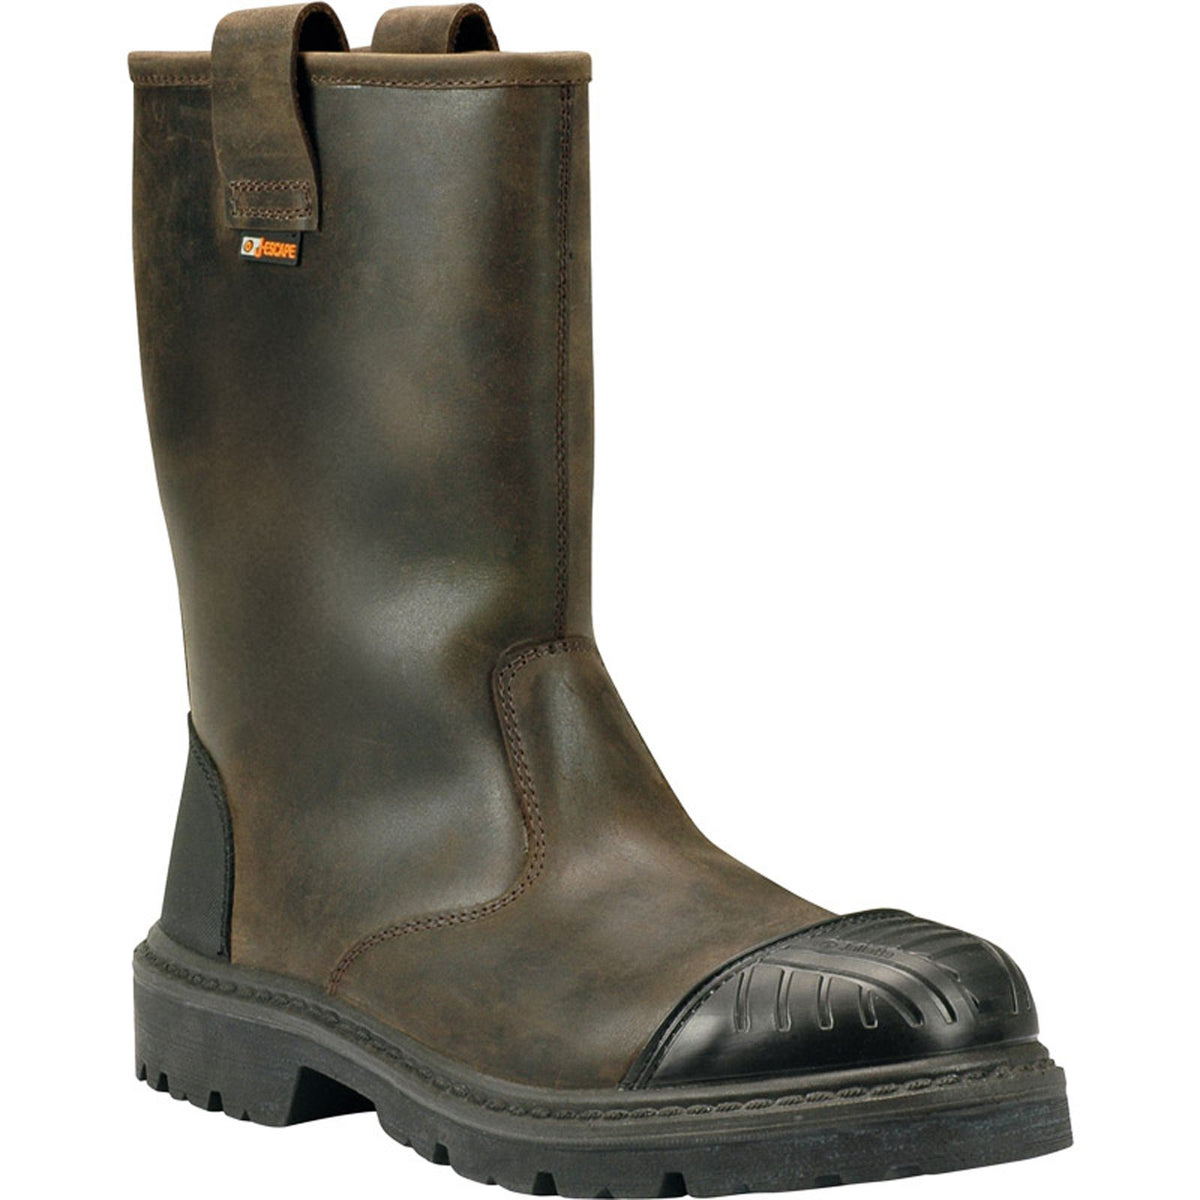 Jallatte Jalsalix Brown Greasy Leather Mens Vibram Safety S3 Toecap Misole Rigger Boots